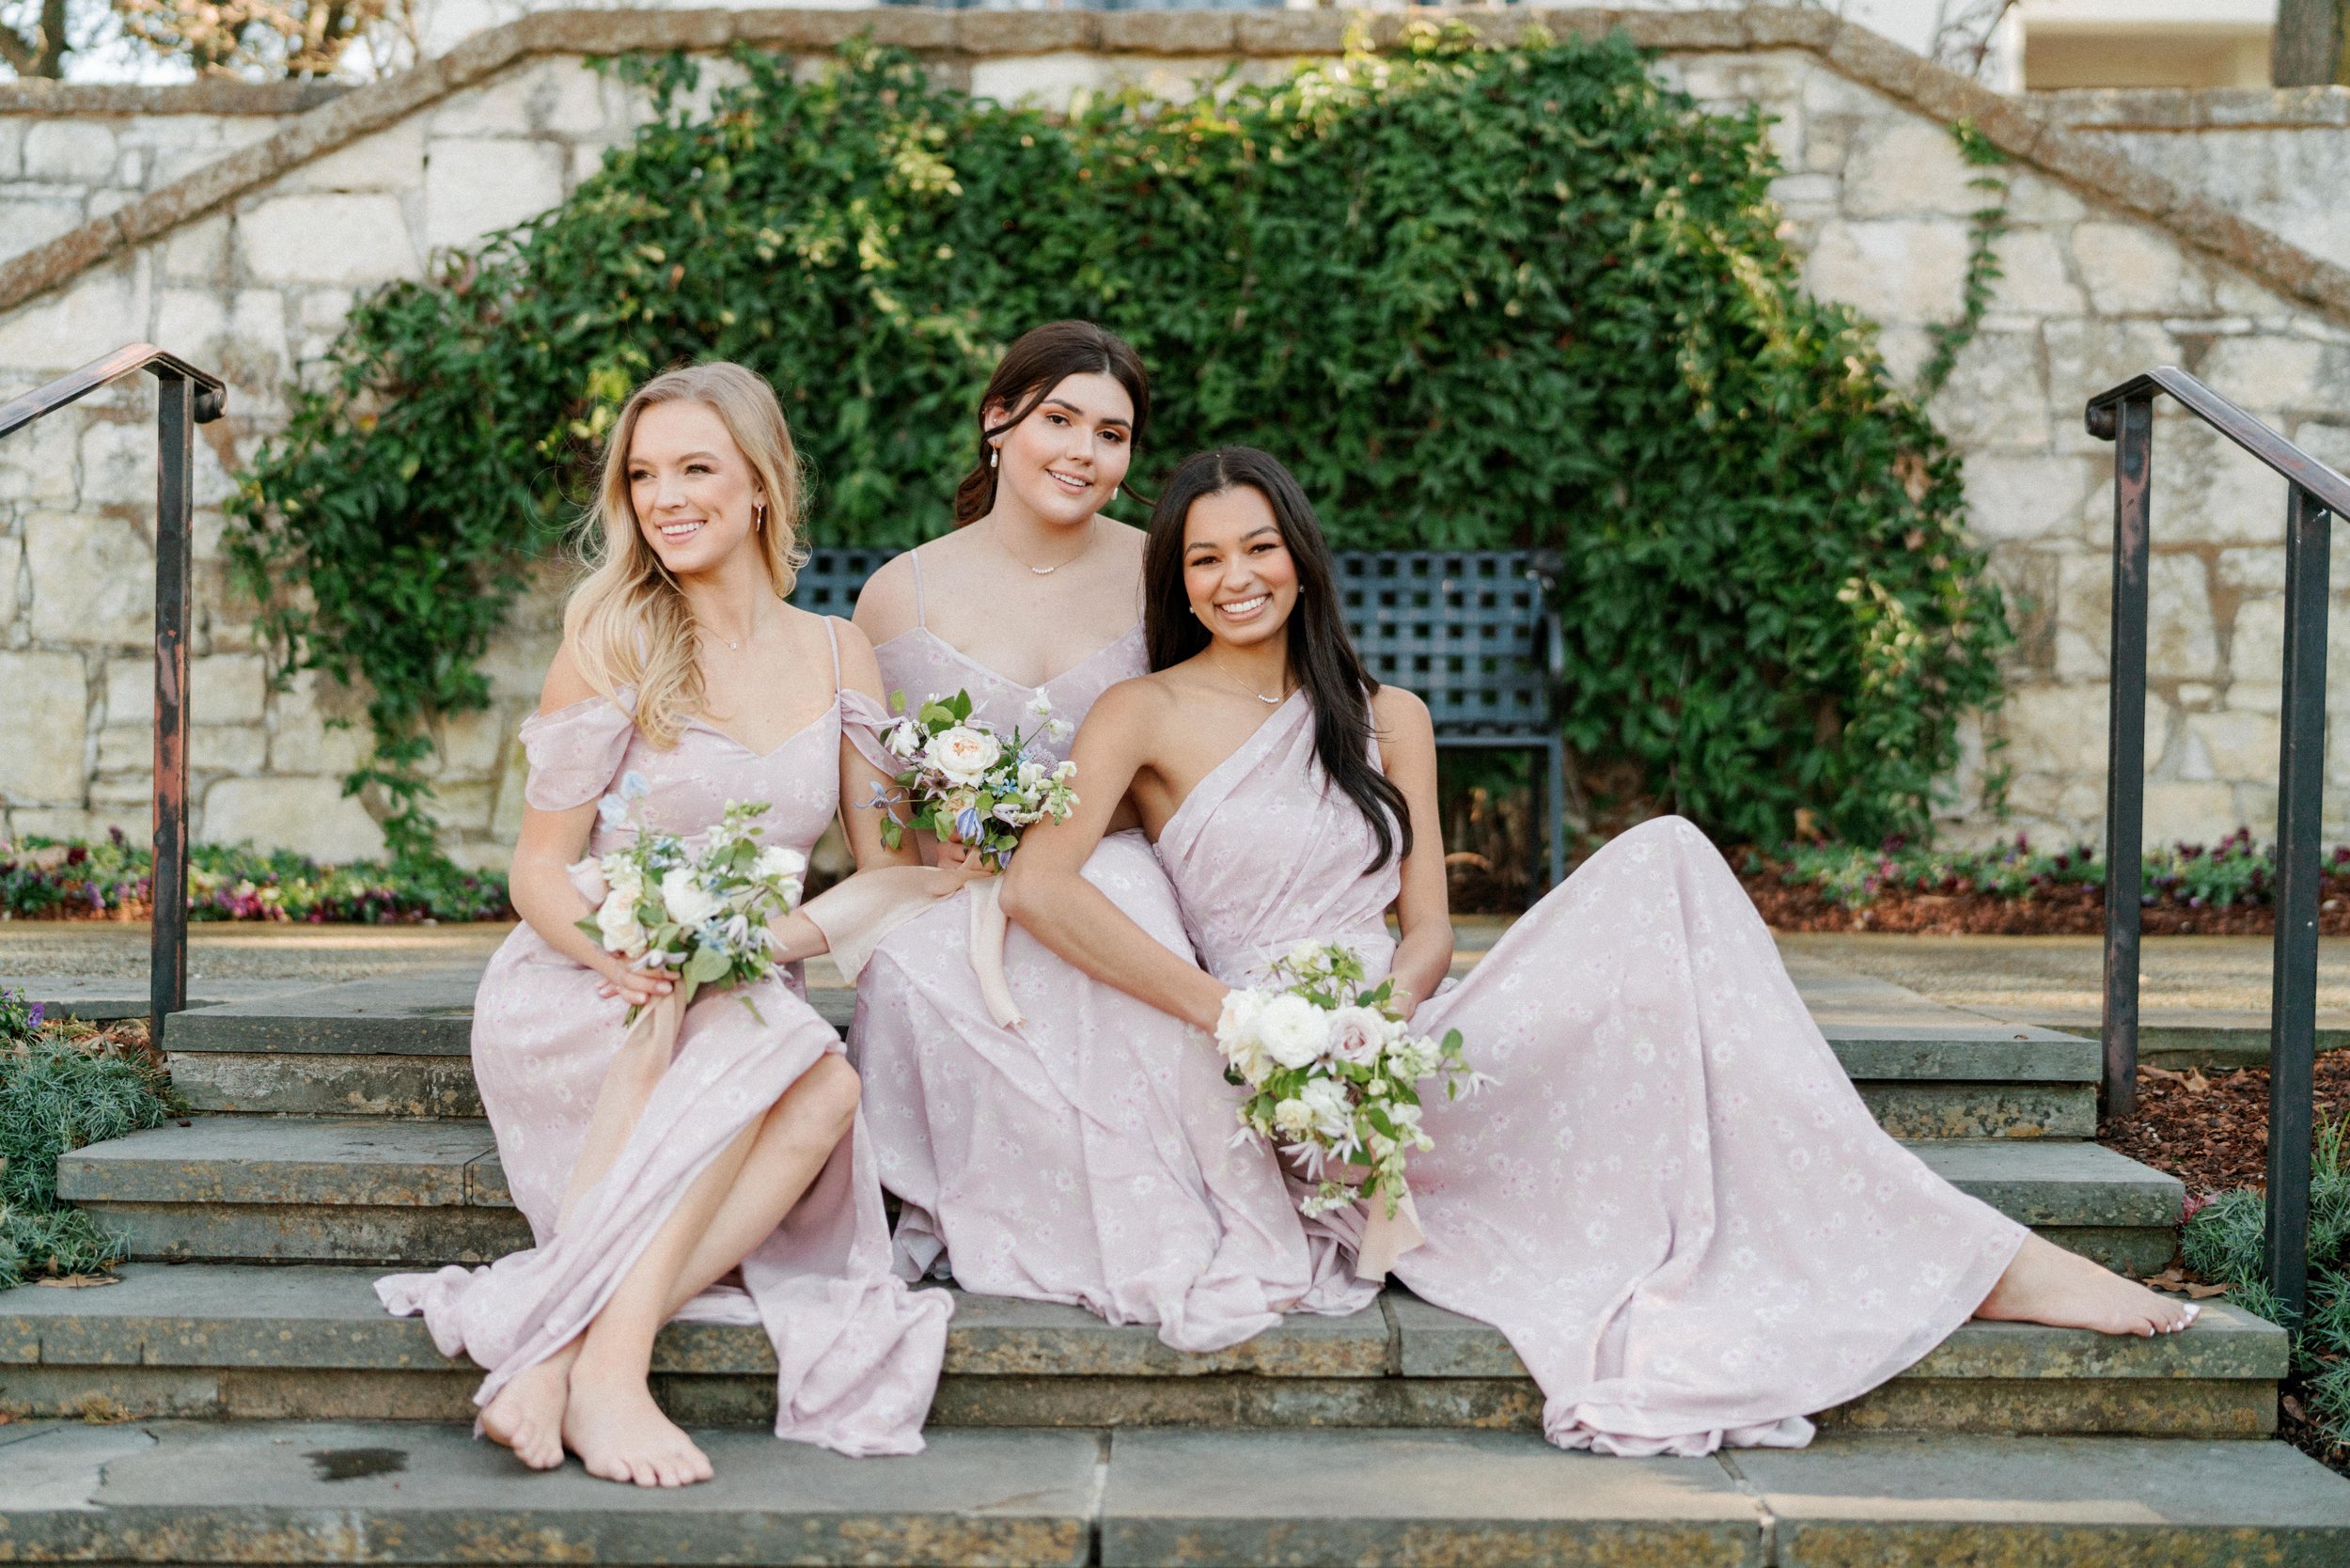 Introducing Our Brand New Line of Floral Bridesmaid Dresses, in  Collaboration With Birdy Grey! — Birdy Grey x Style Me Pretty